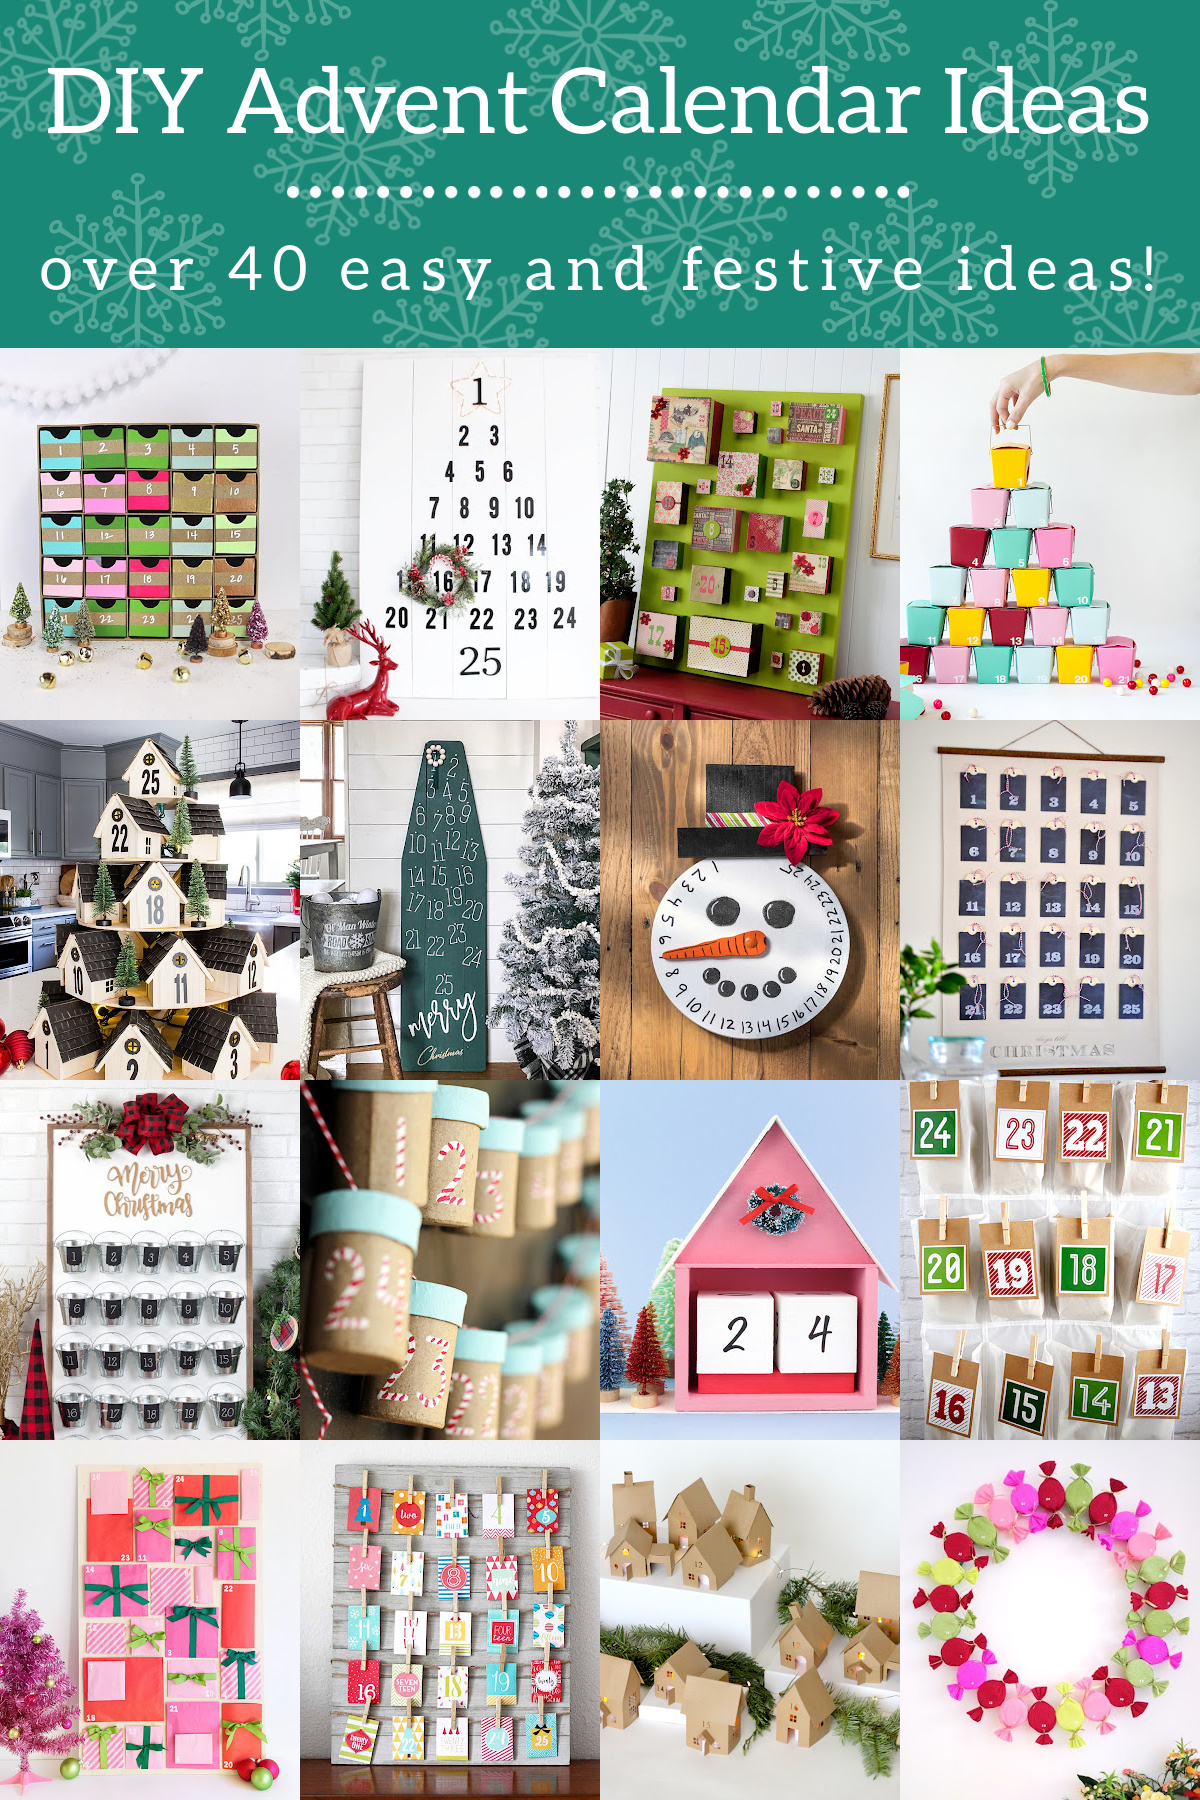 DIY Advent Calendar Ideas for Counting Down to Christmas